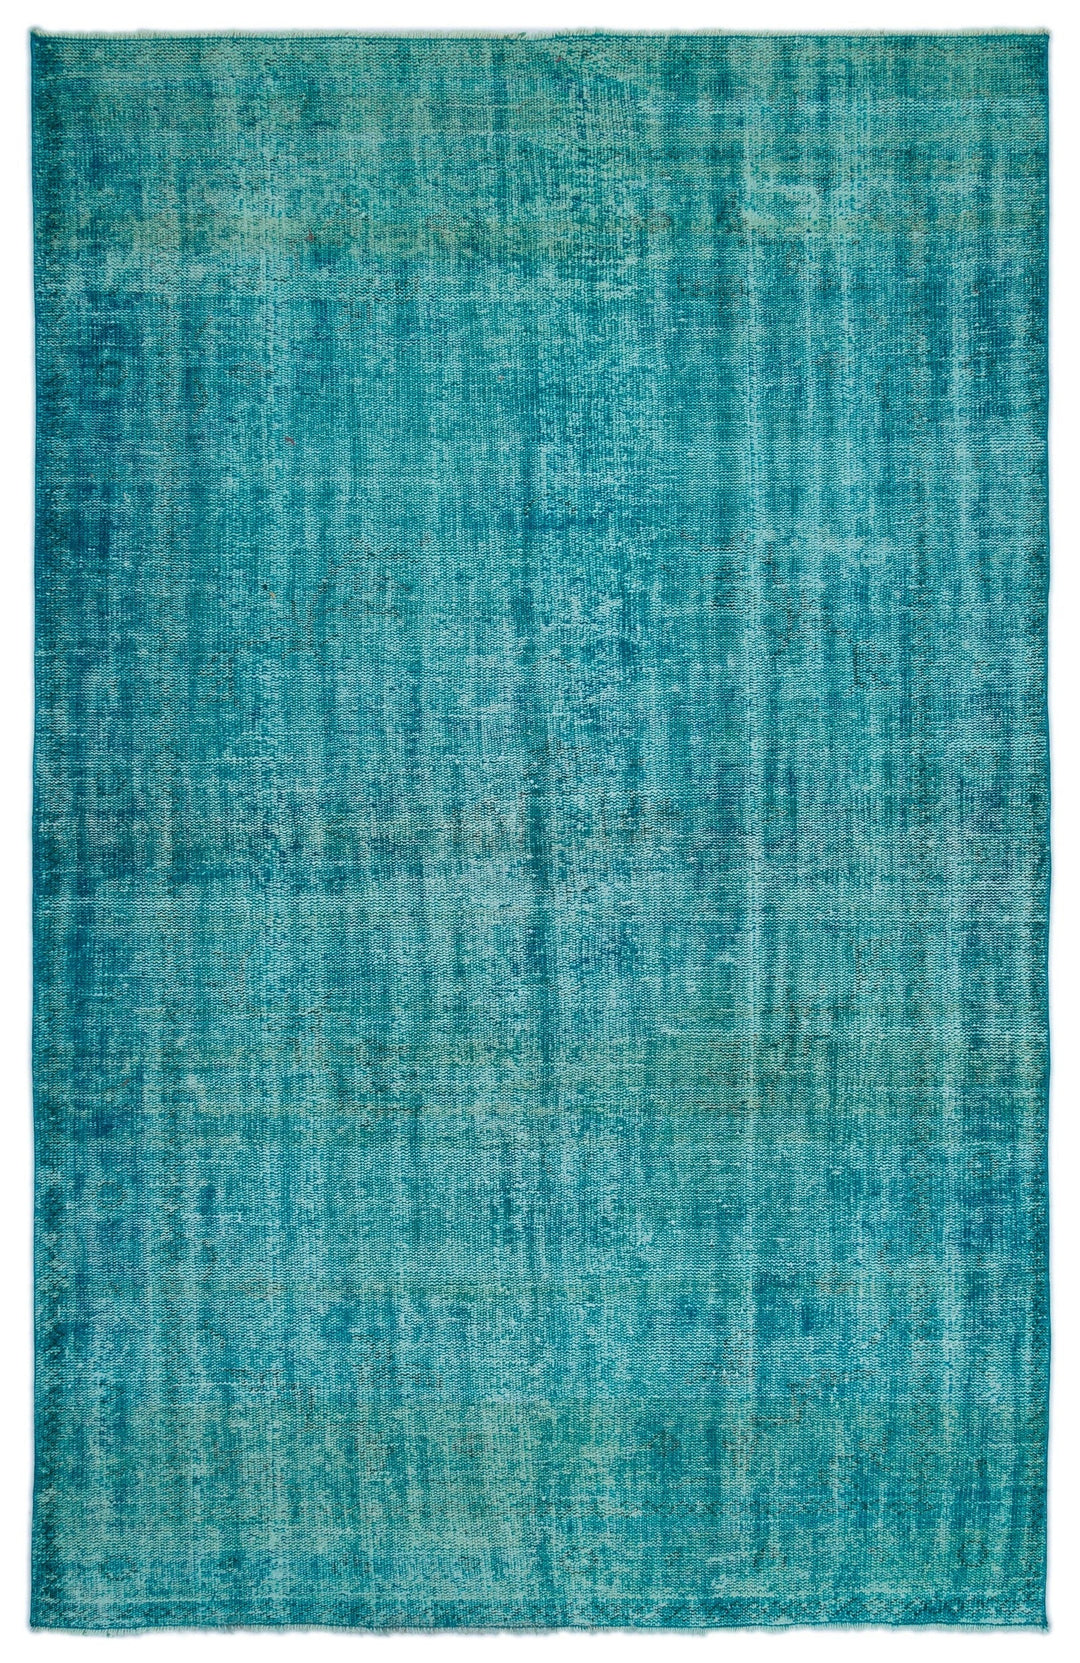 Athens Turquoise Tumbled Wool Hand Woven Rug 180 x 275